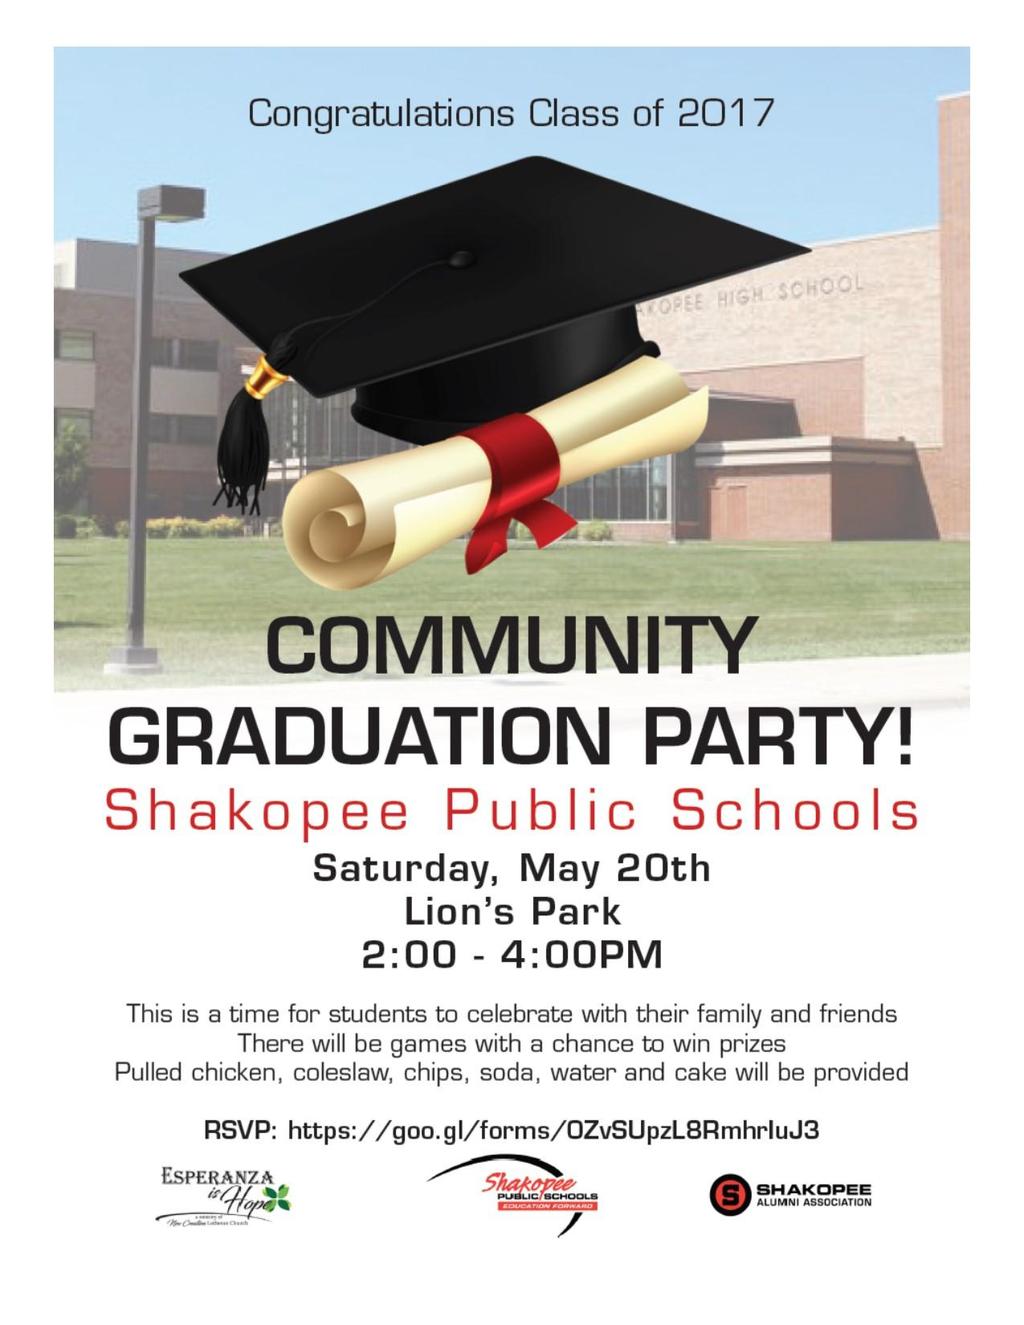 Due to weather, the graduation party will